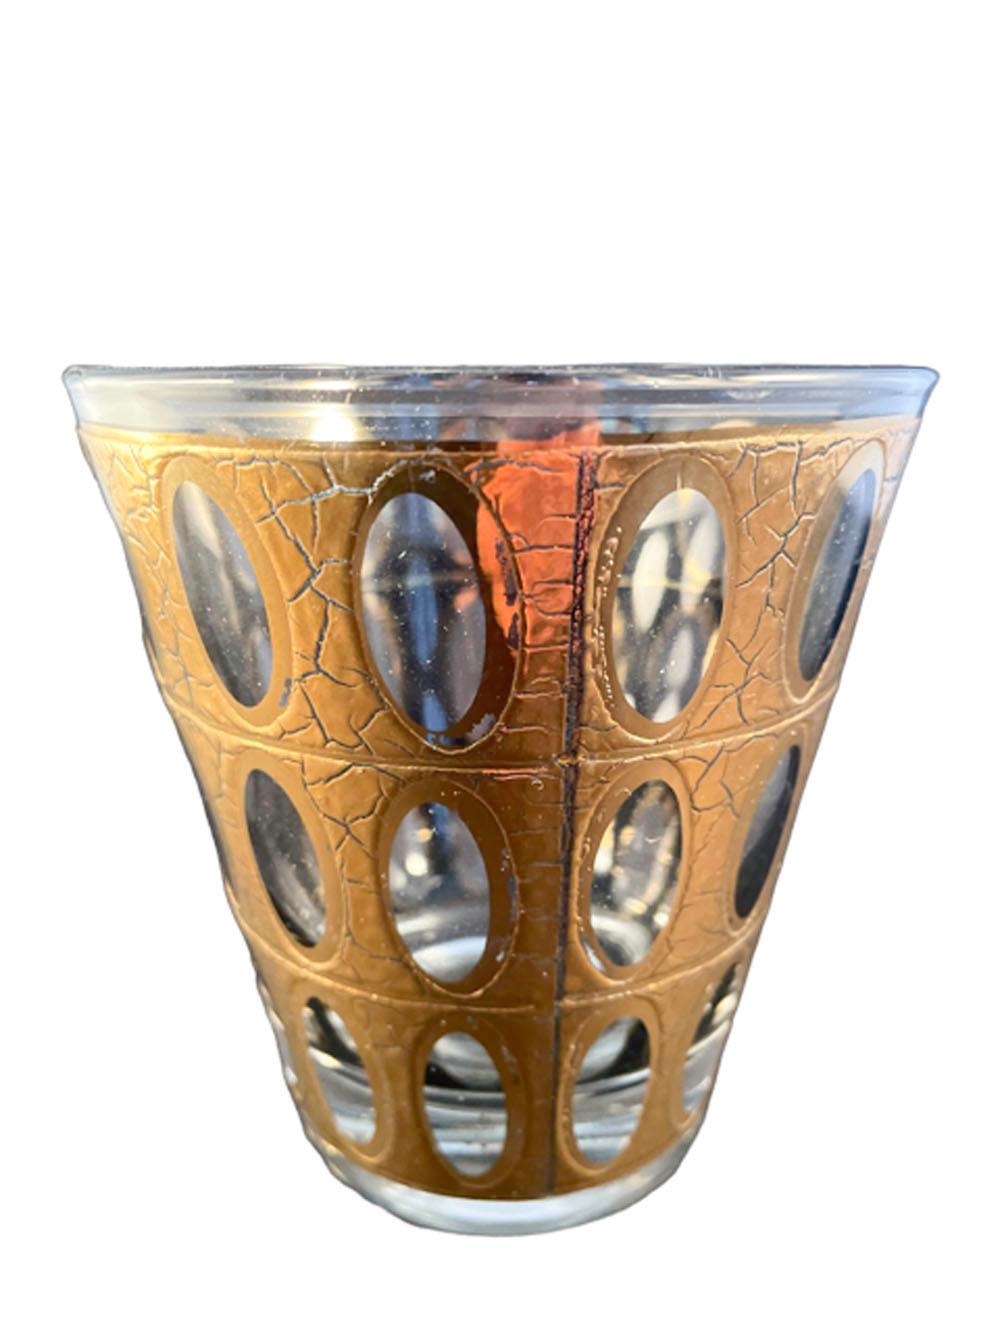 Vintage Double Old Fashioned Glasses by Culver, LTD in the 'Pisa' Pattern 1